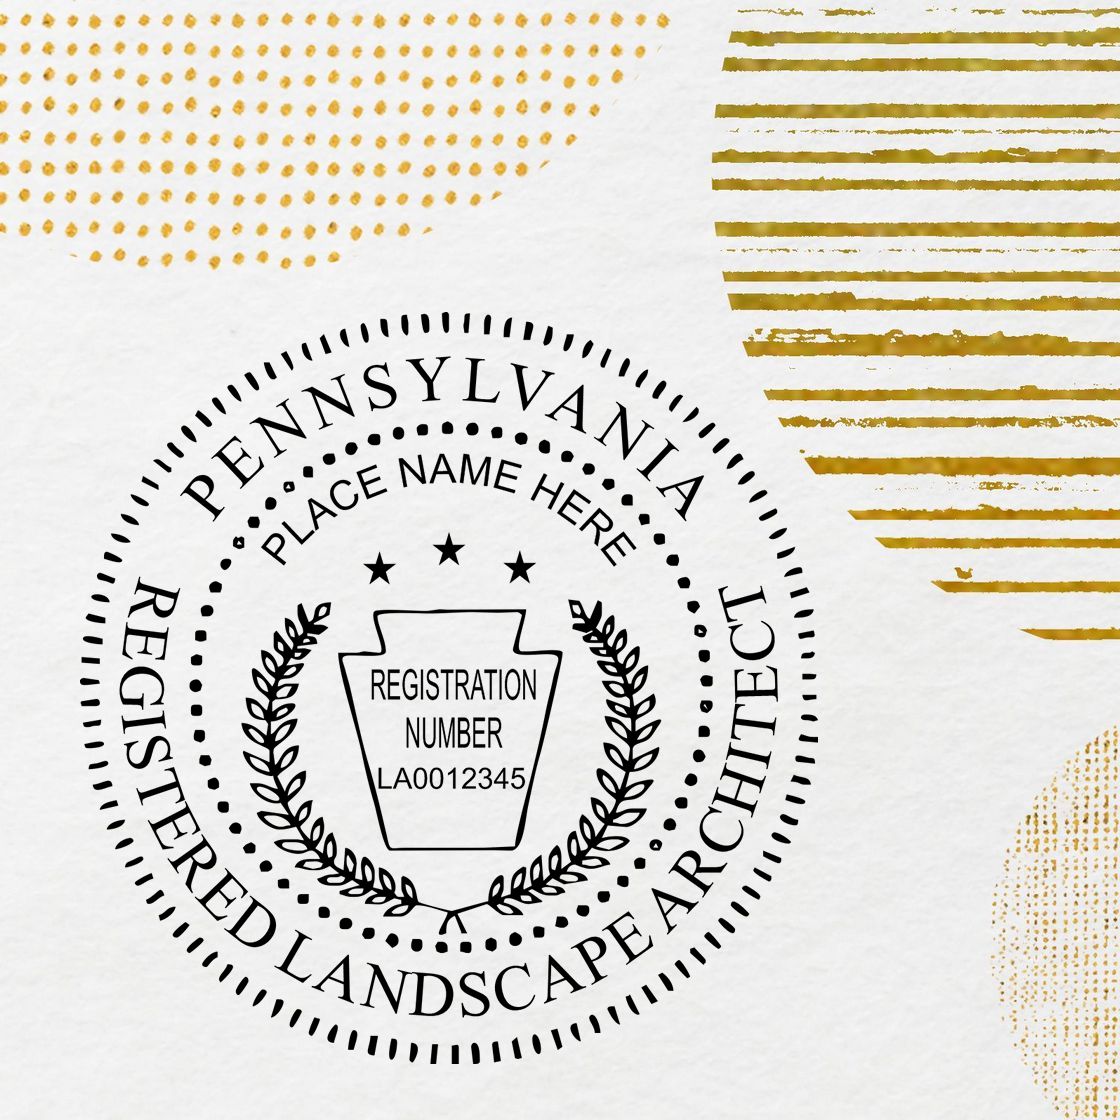 This paper is stamped with a sample imprint of the Pennsylvania Landscape Architectural Seal Stamp, signifying its quality and reliability.